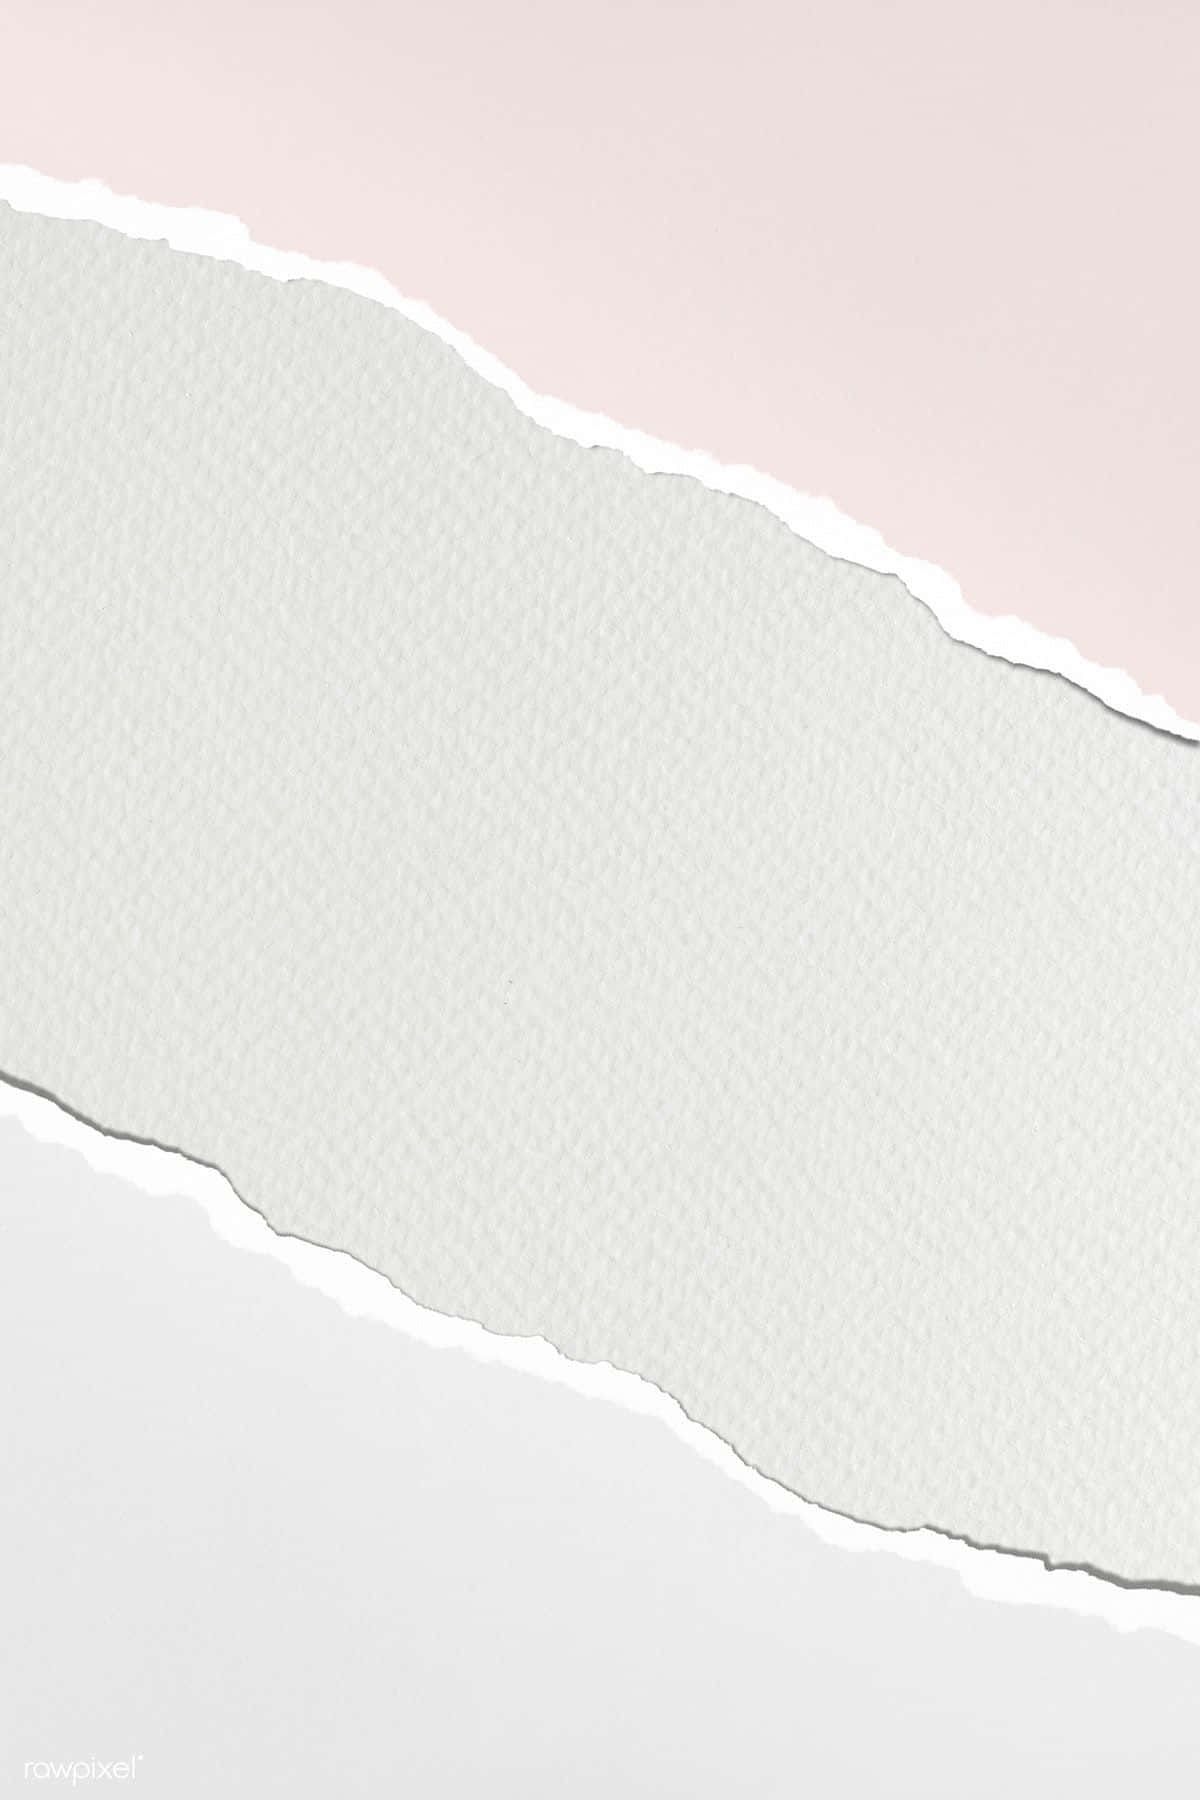 A White Paper With A Pink And White Background